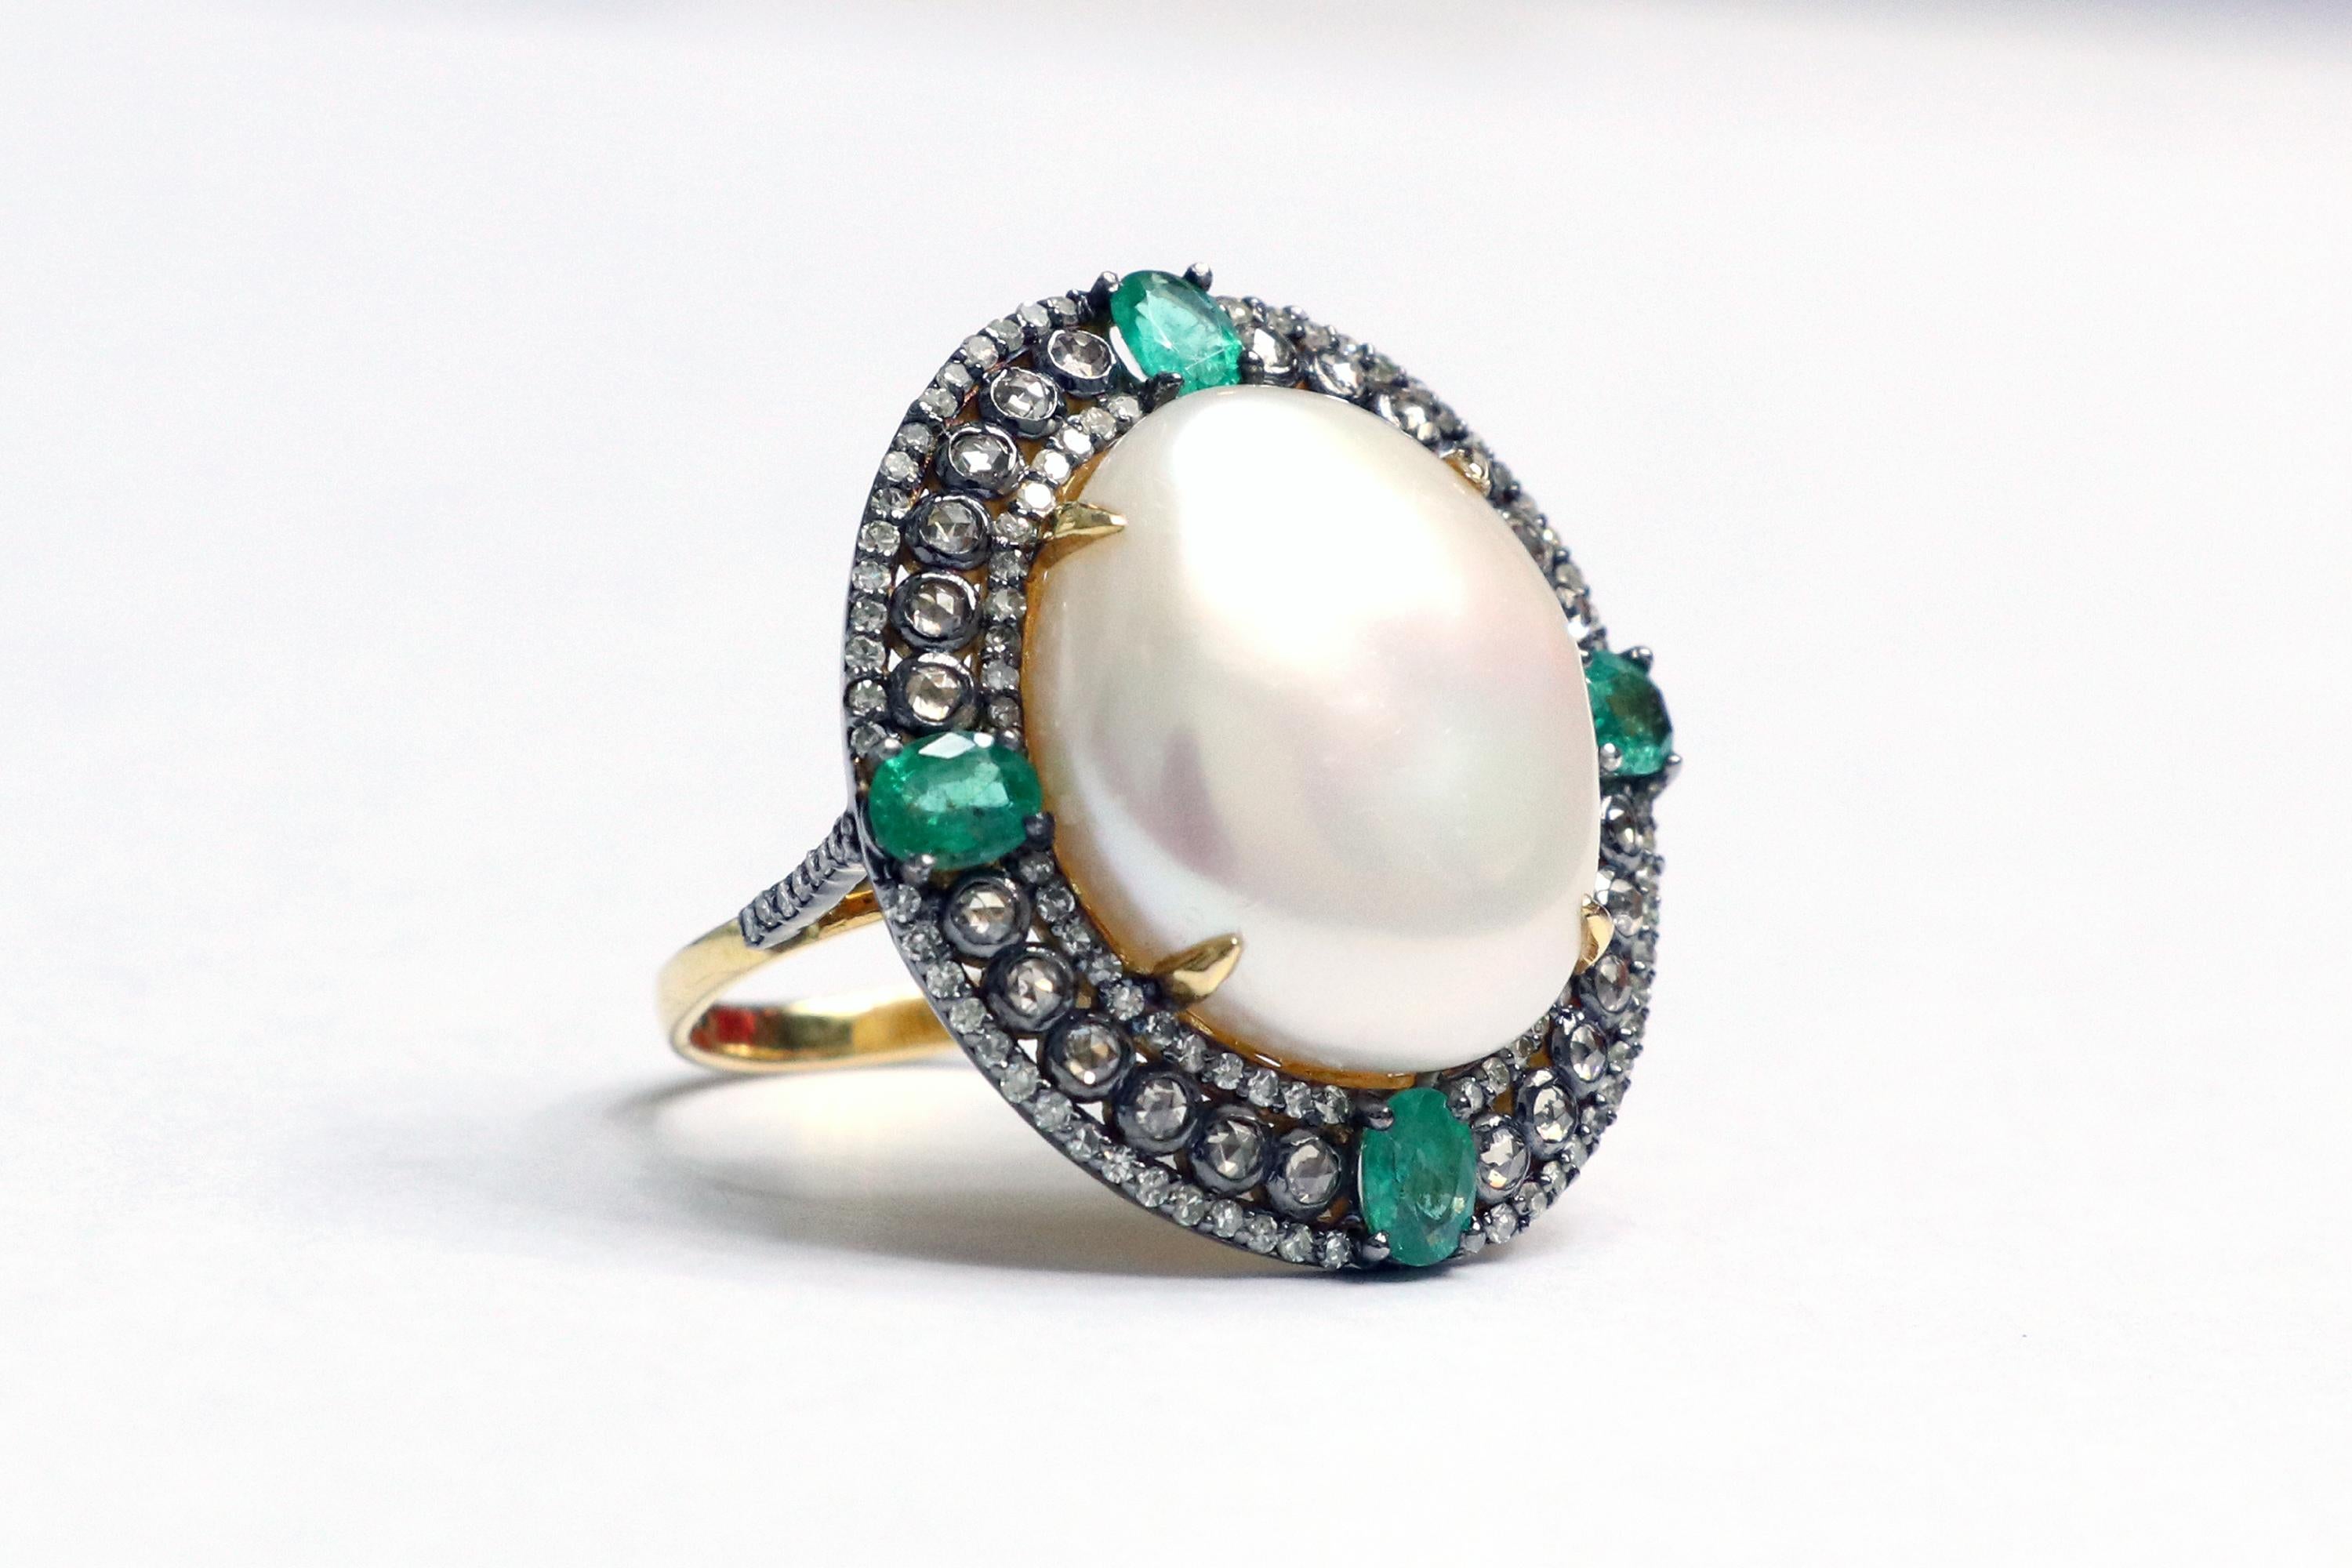 Victorian Style Emerald, Diamond, and Pearl Statement Ring

This distinctive sheen pearl, shamrock emerald diamond ring is glorious. The solitaire uneven cabochon shape natural half-dome pearl in yellow gold eagle prong setting is surrounded with